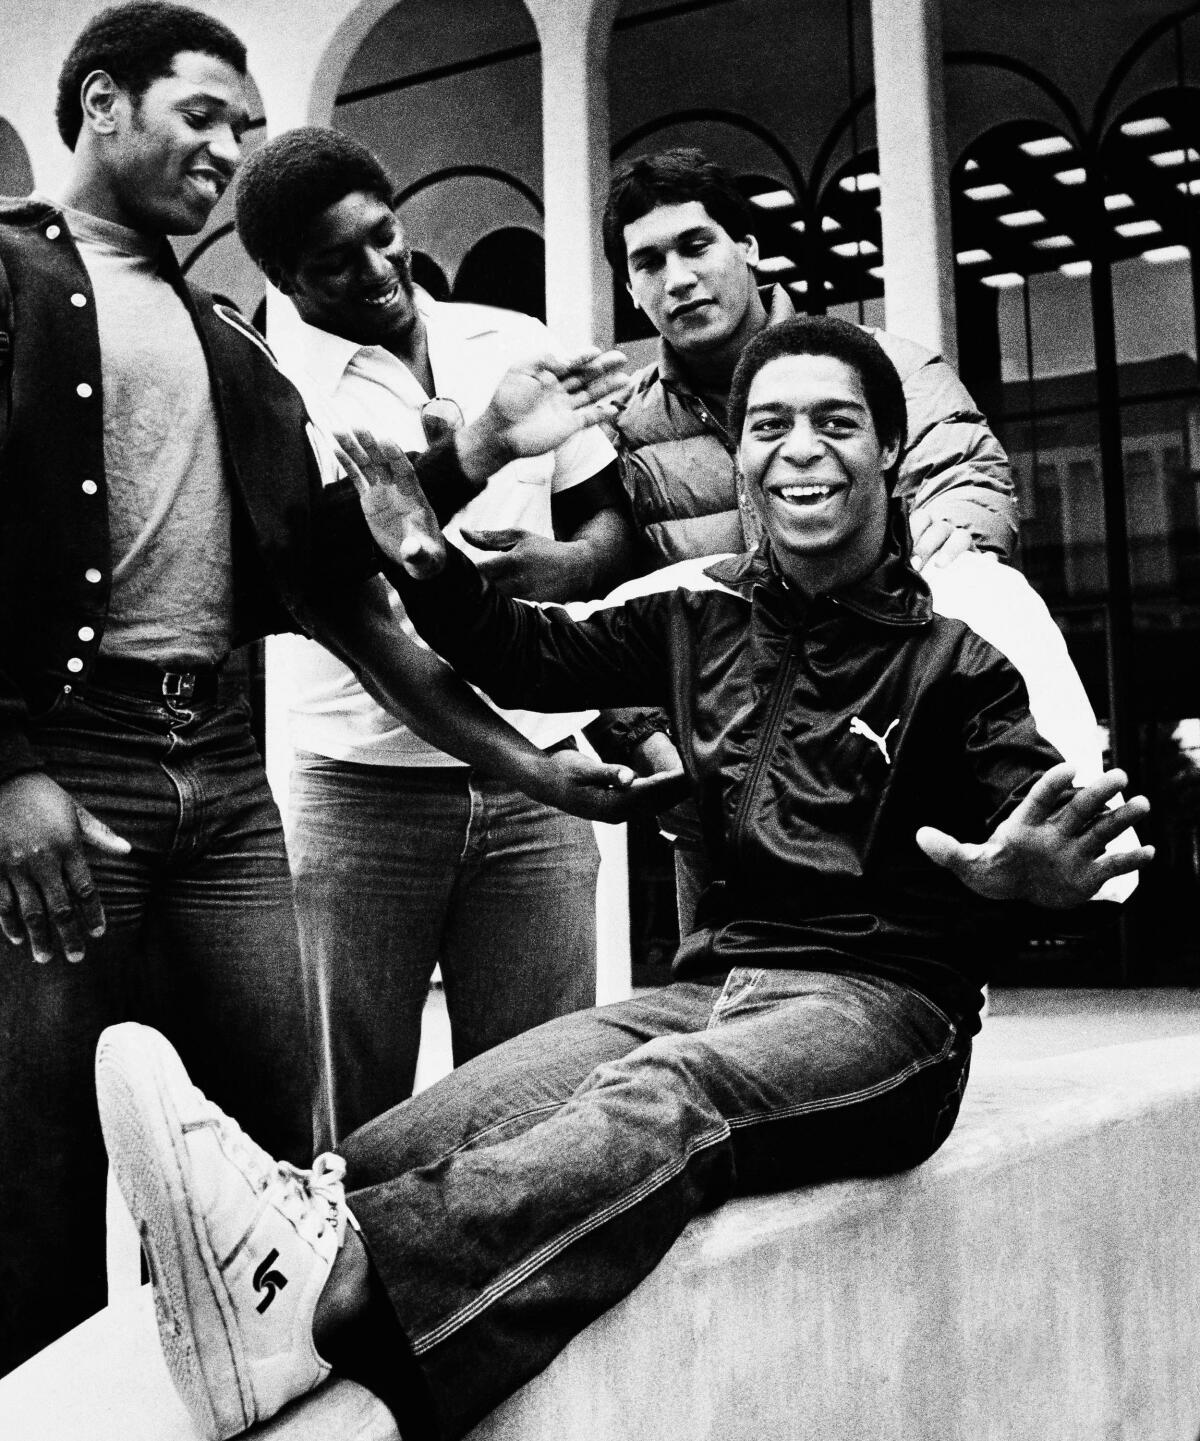 USC's Marcus Allen sits and jokes around with teammates Dennis Edwards, Byron Darby and George Achica in 1981